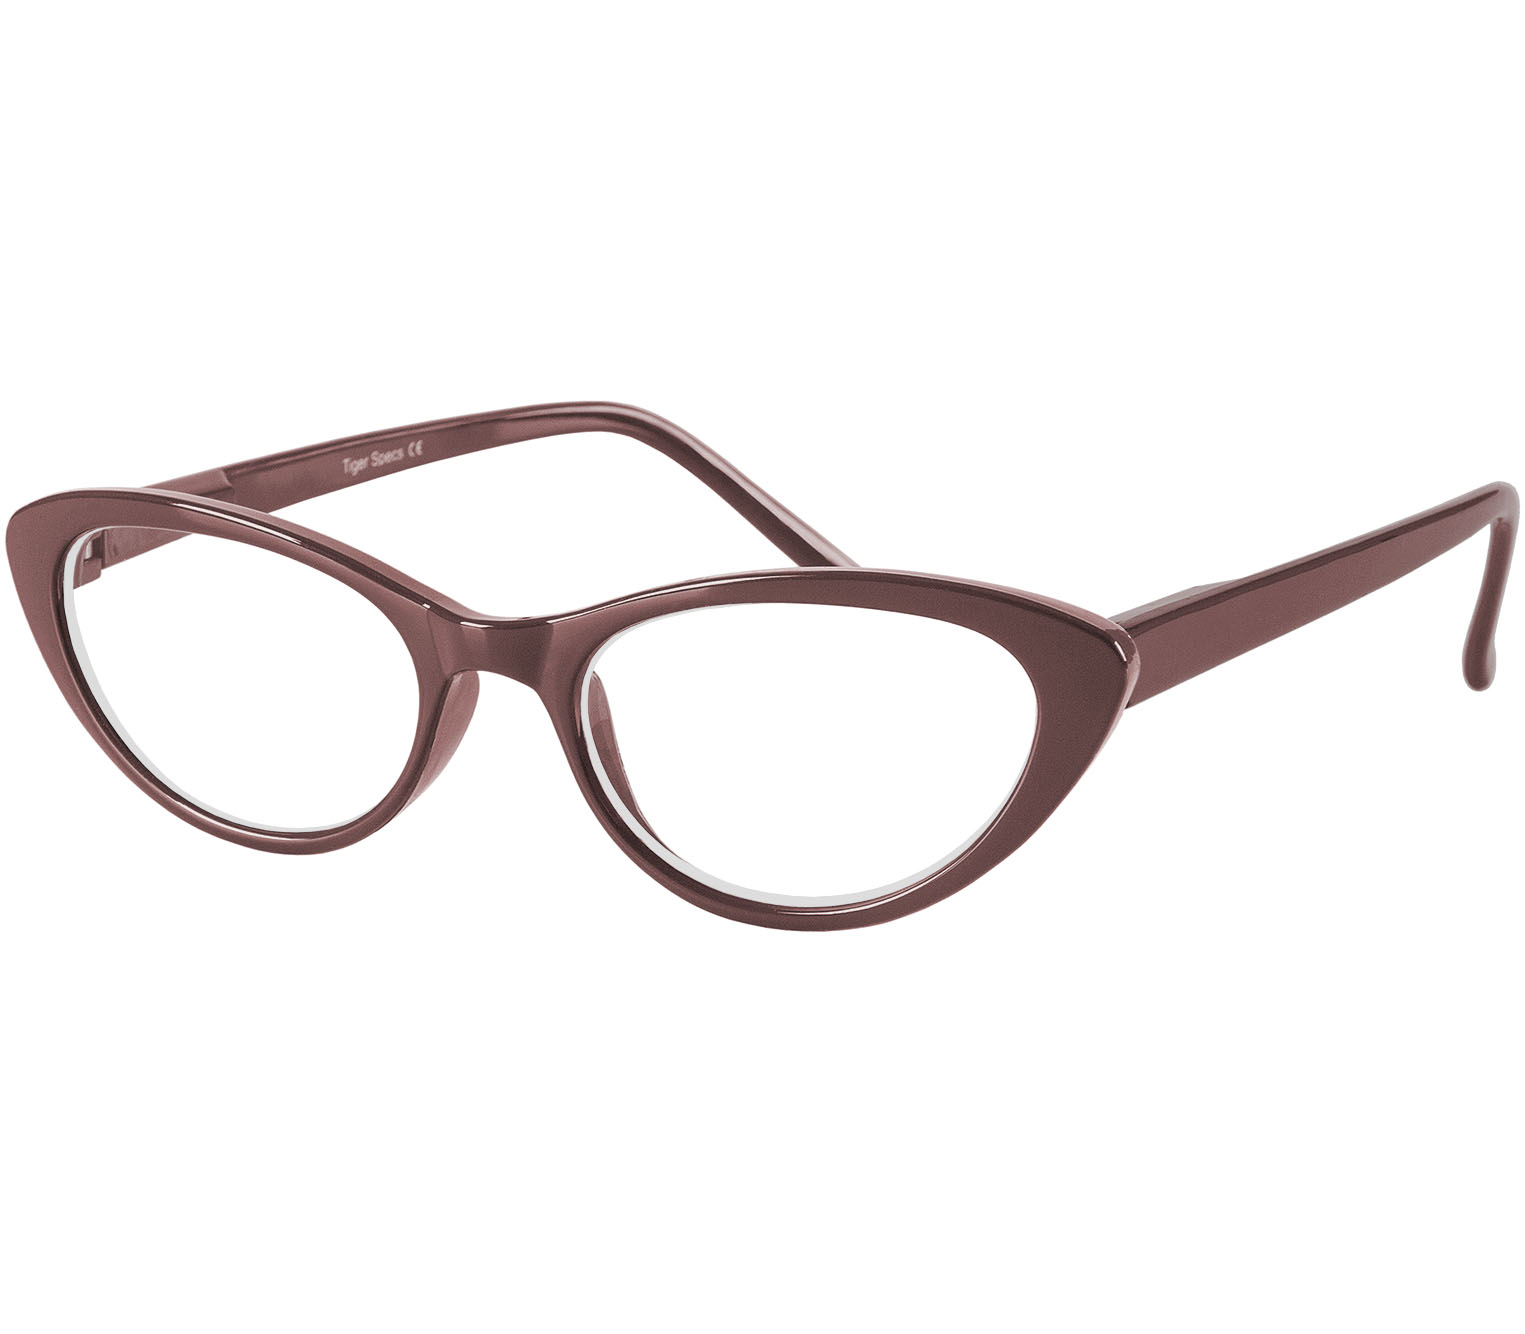 Main Image (Angle) - Carly (Brown) Reading Glasses